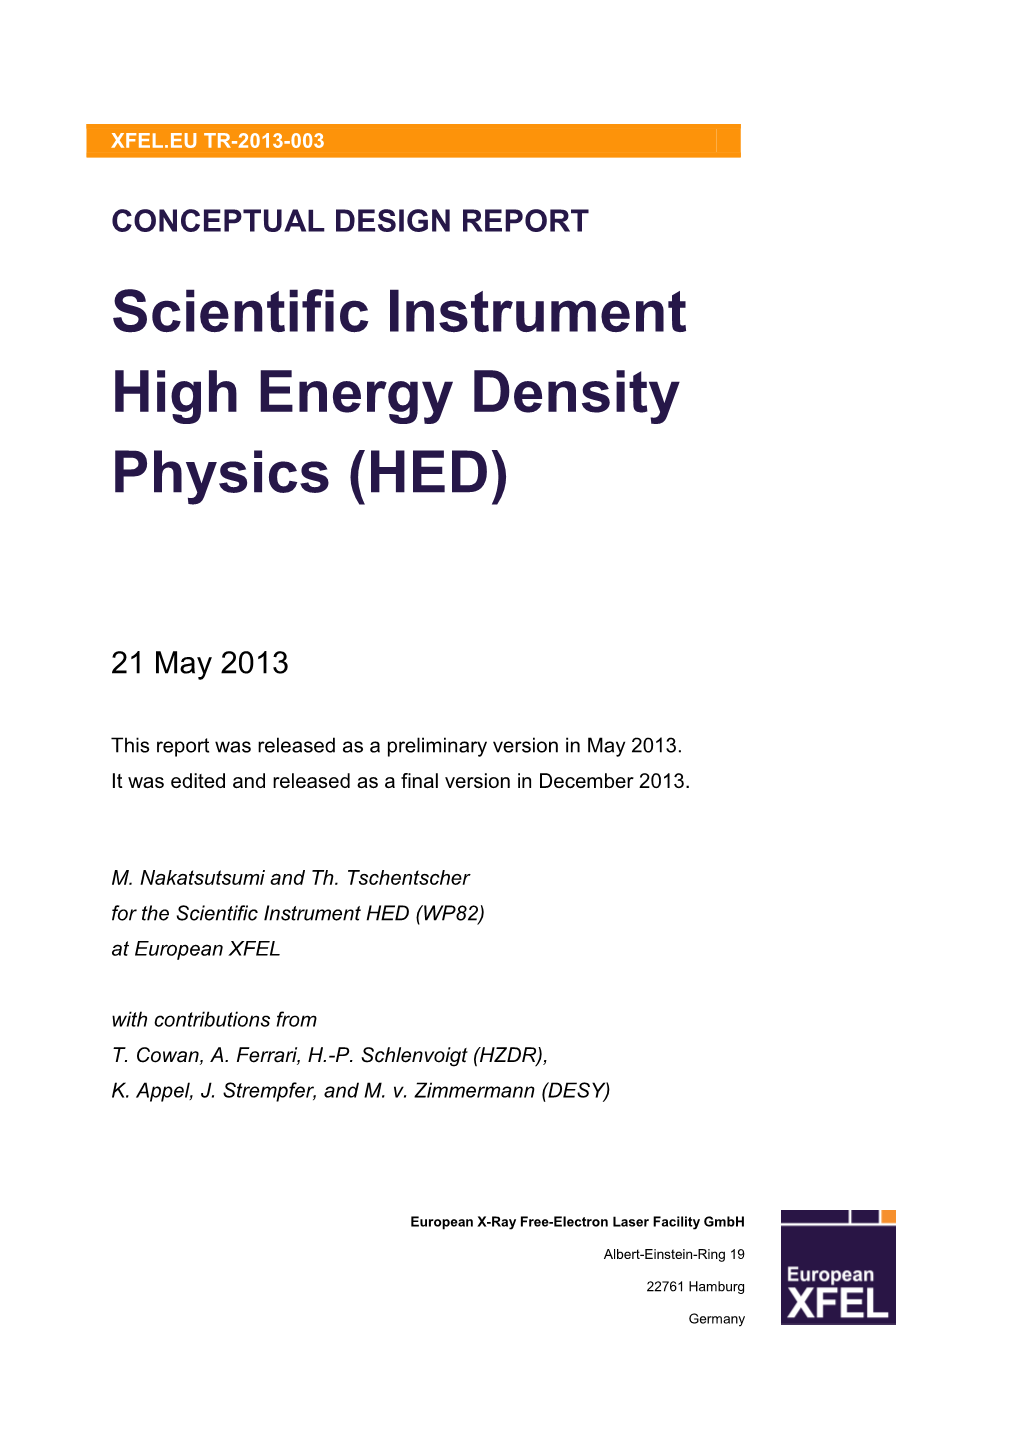 CDR: Scientific Instrument High Energy Density Physics (HED) Contents